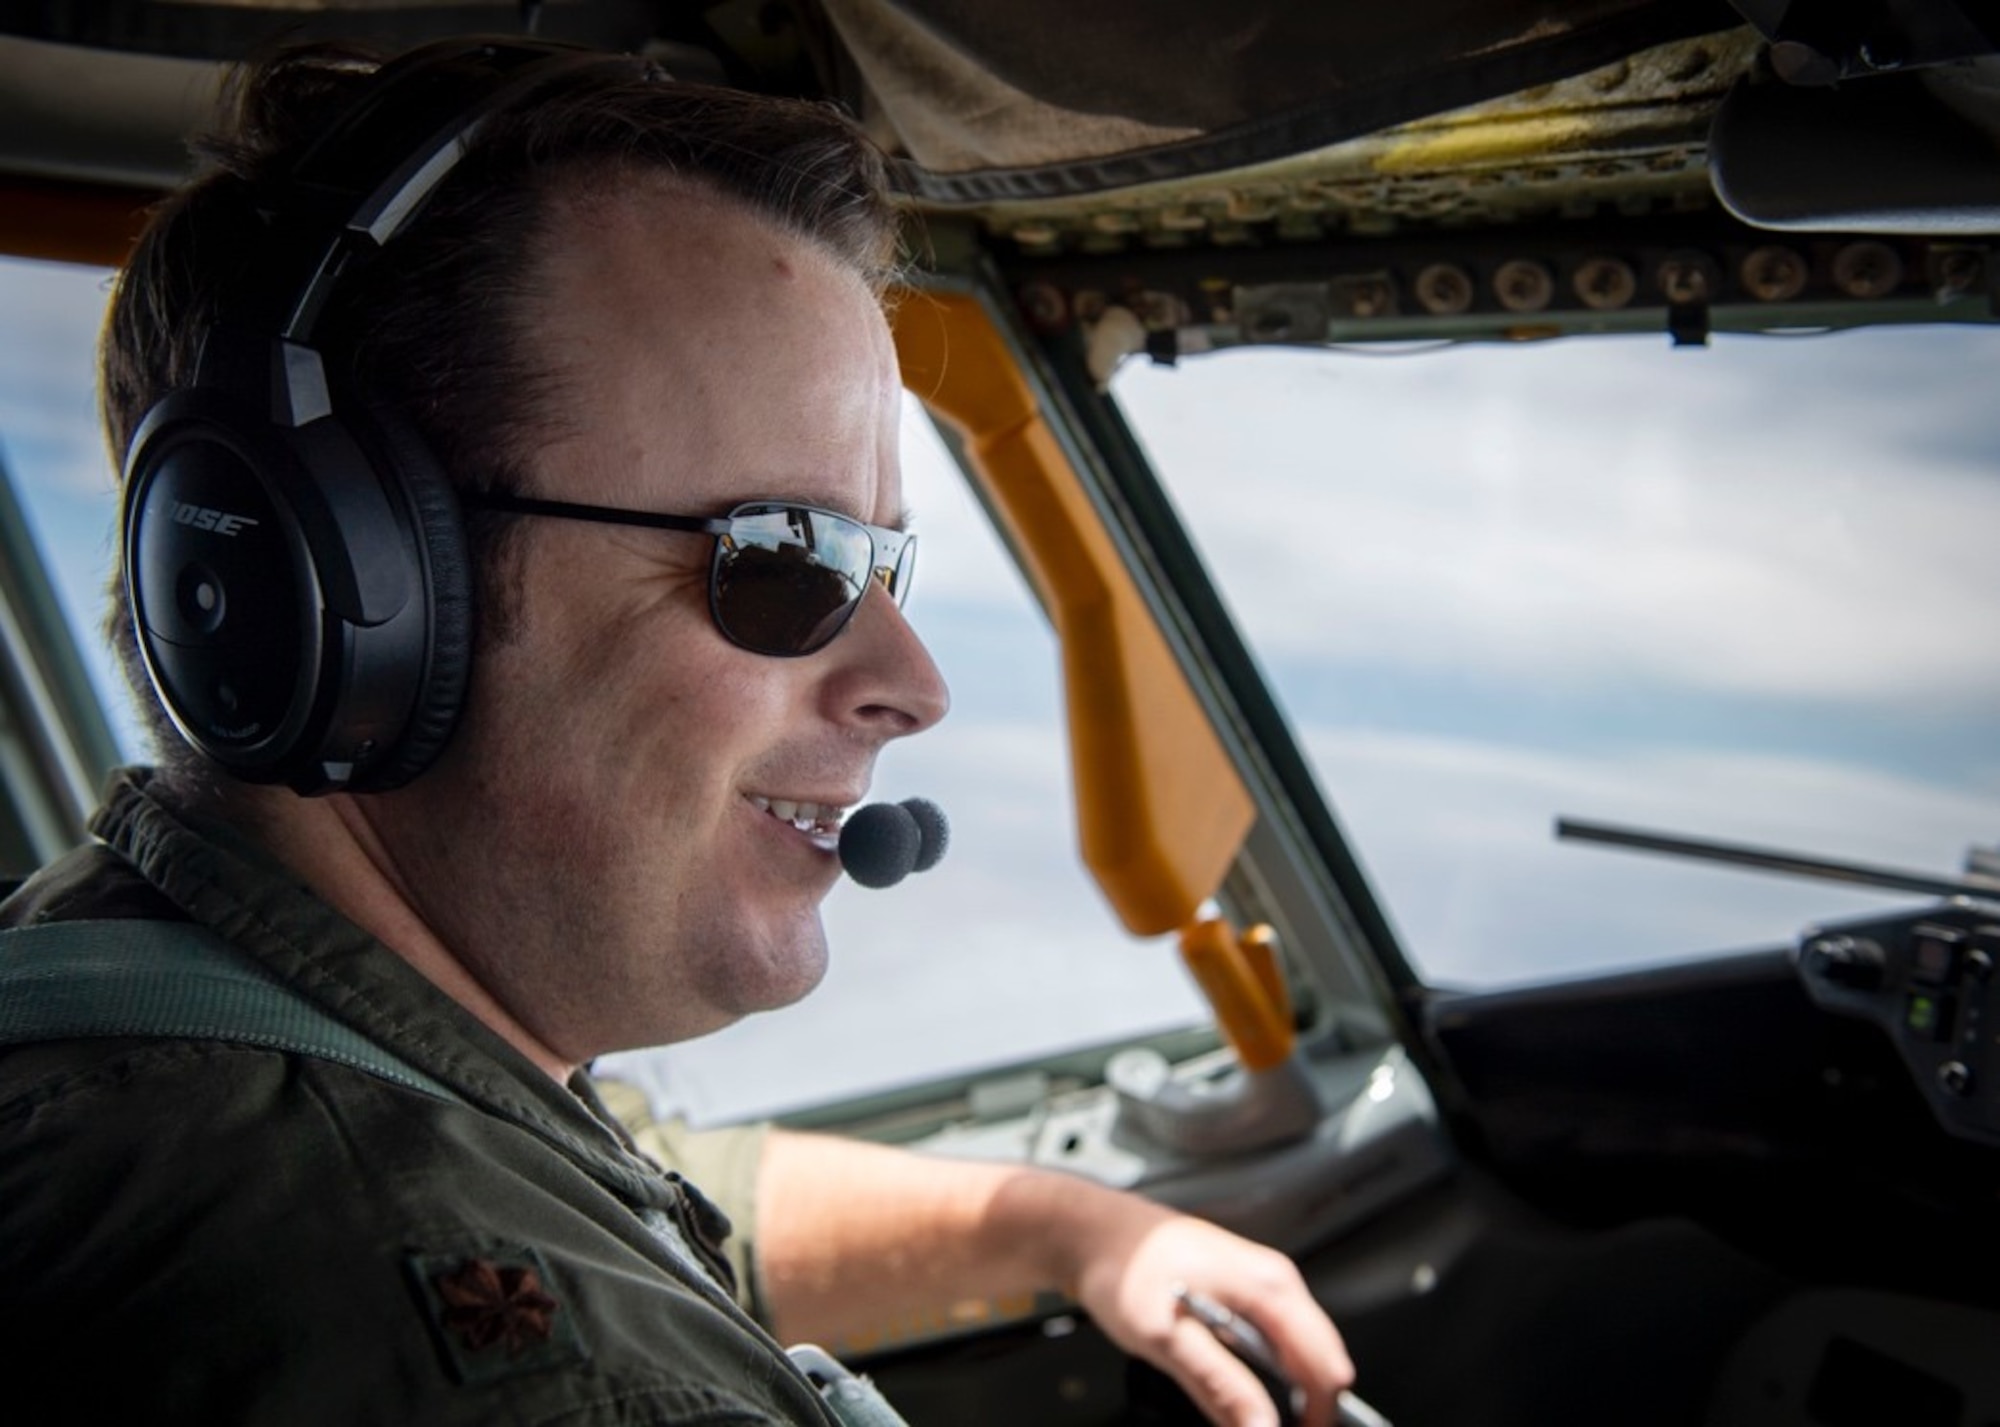 U.S. Air Force Maj. William Smith, a KC-135 Stratotanker aircraft pilot assigned to the 91st Air Refueling Squadron, tests new Aircrew Laser Eye Protection glasses while flying a KC-135 during a training mission over Charleston, South Carolina, June 23, 2022. Smith participated in a developmental test of the new ALEP glasses conducted by the 46th Test and Evaluation Squadron from Eglin Air Force Base, Florida. (U.S. Air Force photo by Airman 1st Class Lauren Cobin)